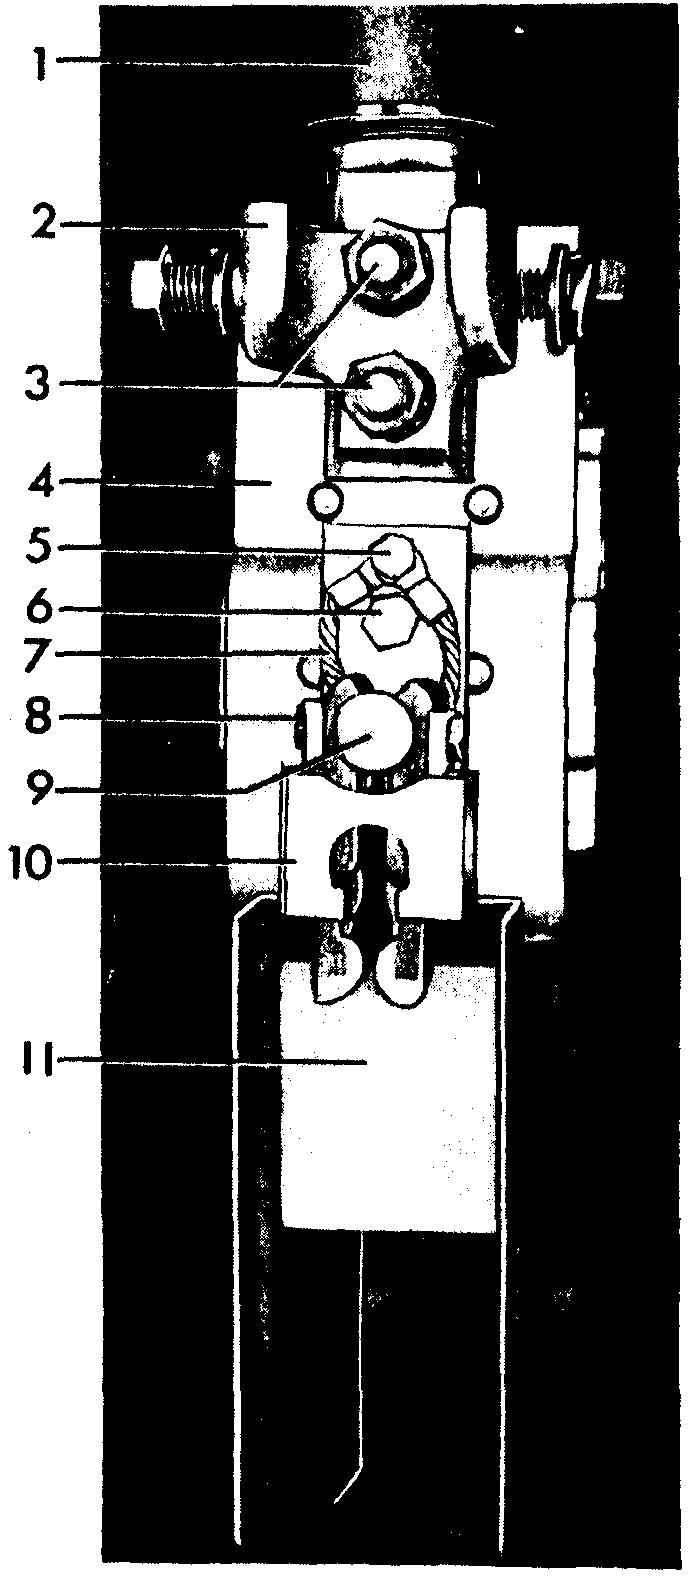 Figure 22. (8039586) Rear Bushing Assembly 1. Rear Bushing 2. Guide and Support for Interrupt,er 3. Bolts for Contact Support 4. Contact Support 5. Bolt for Flexible Braid 6. Mounting Bolt 7.